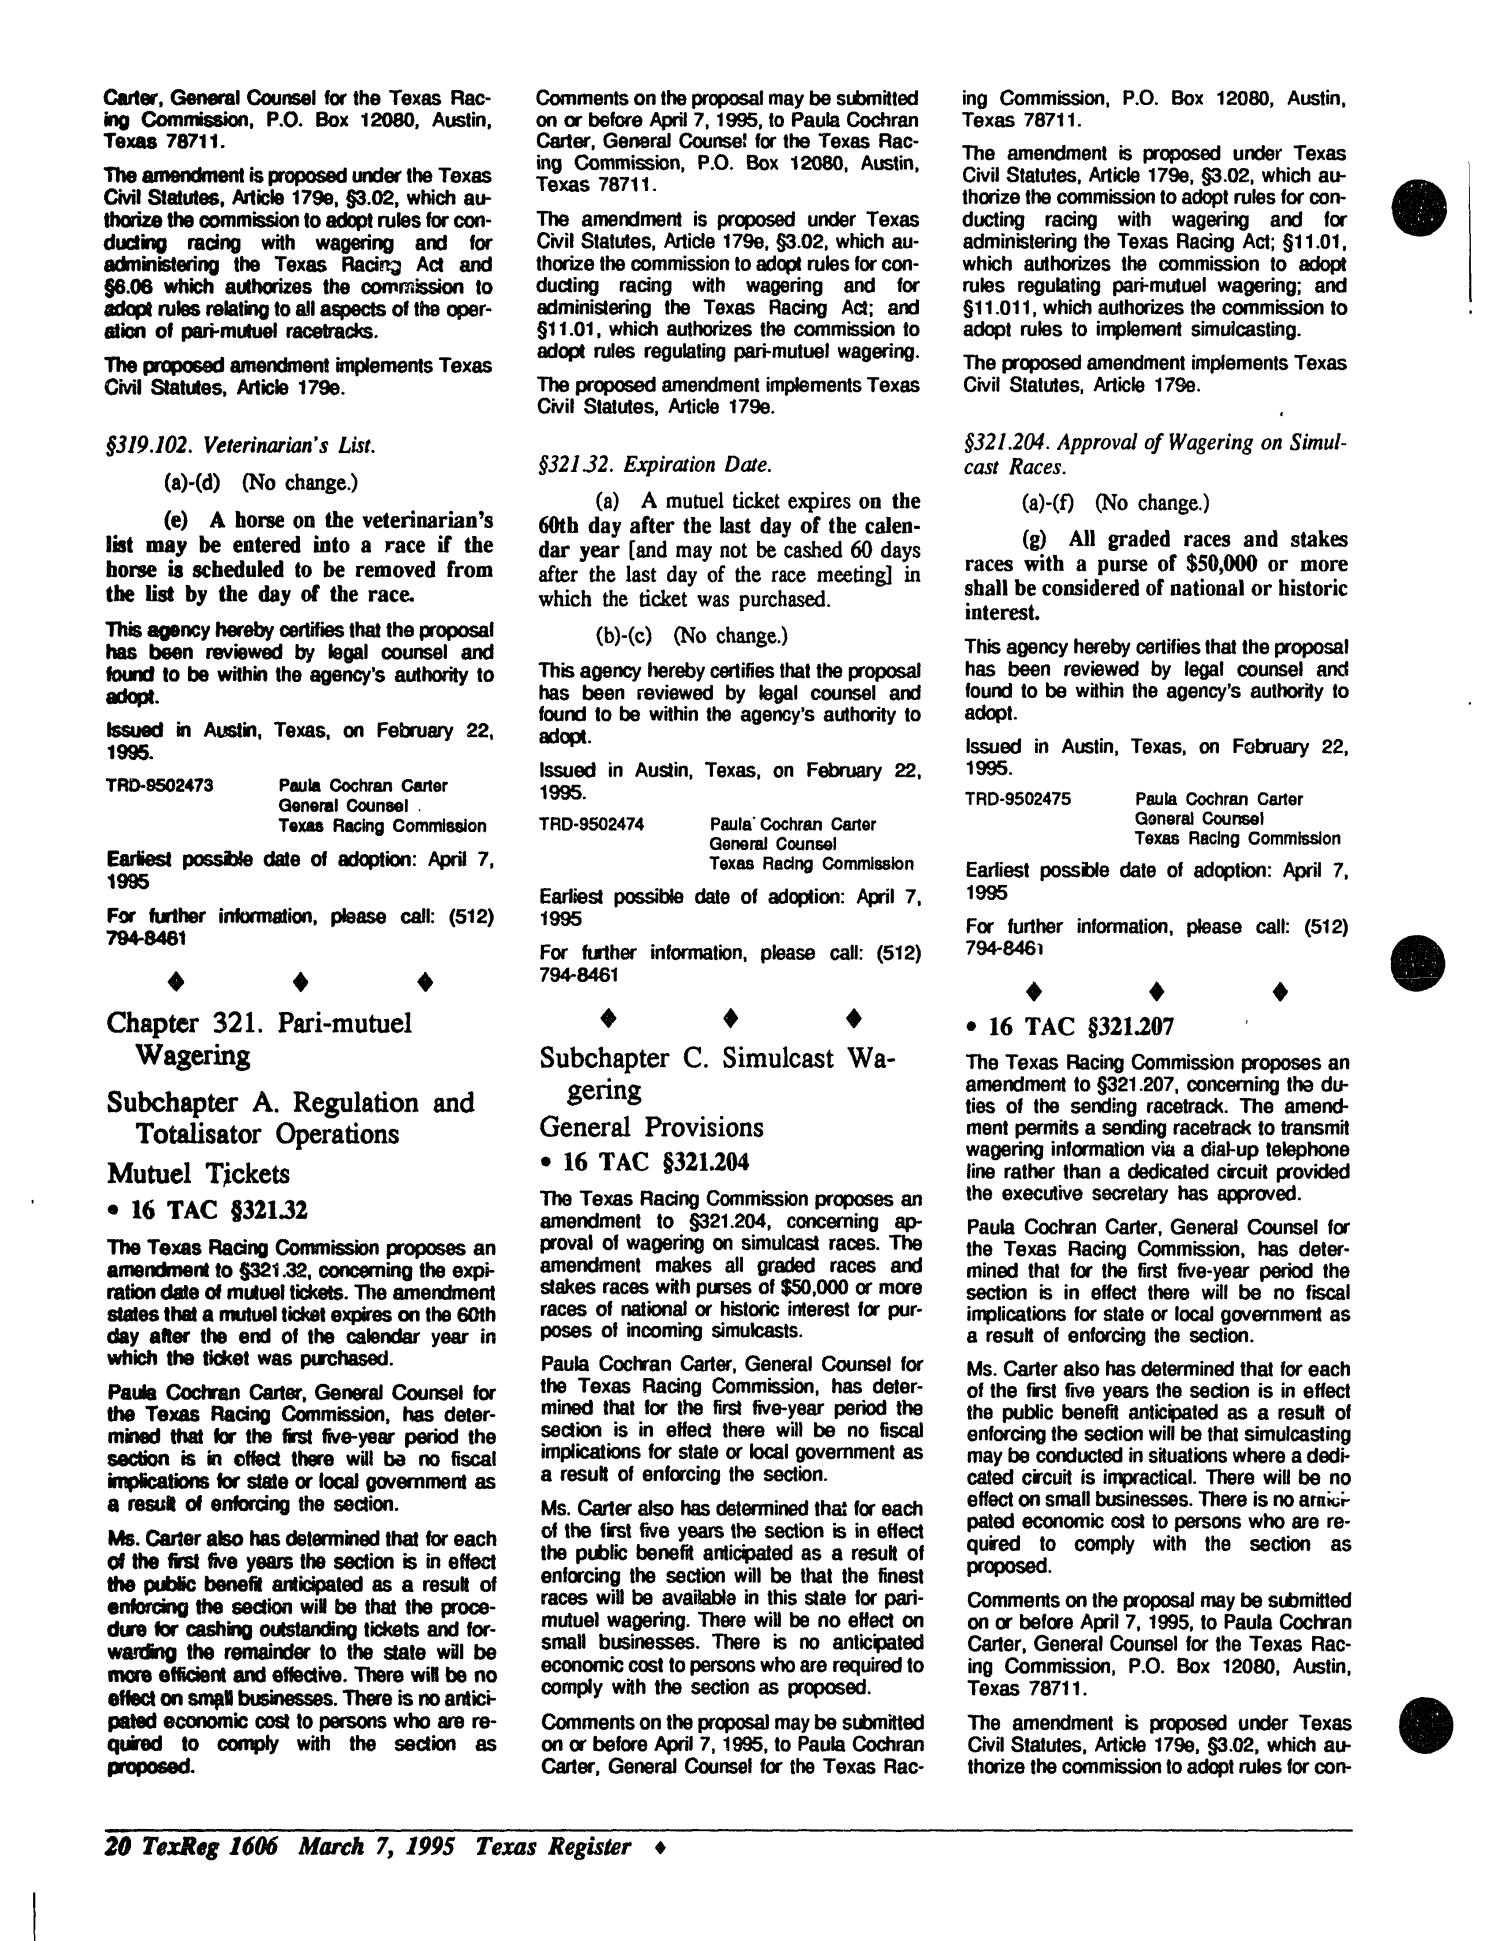 Texas Register, Volume 20, Number 18, Pages 1591-1715, March 7, 1995
                                                
                                                    1606
                                                